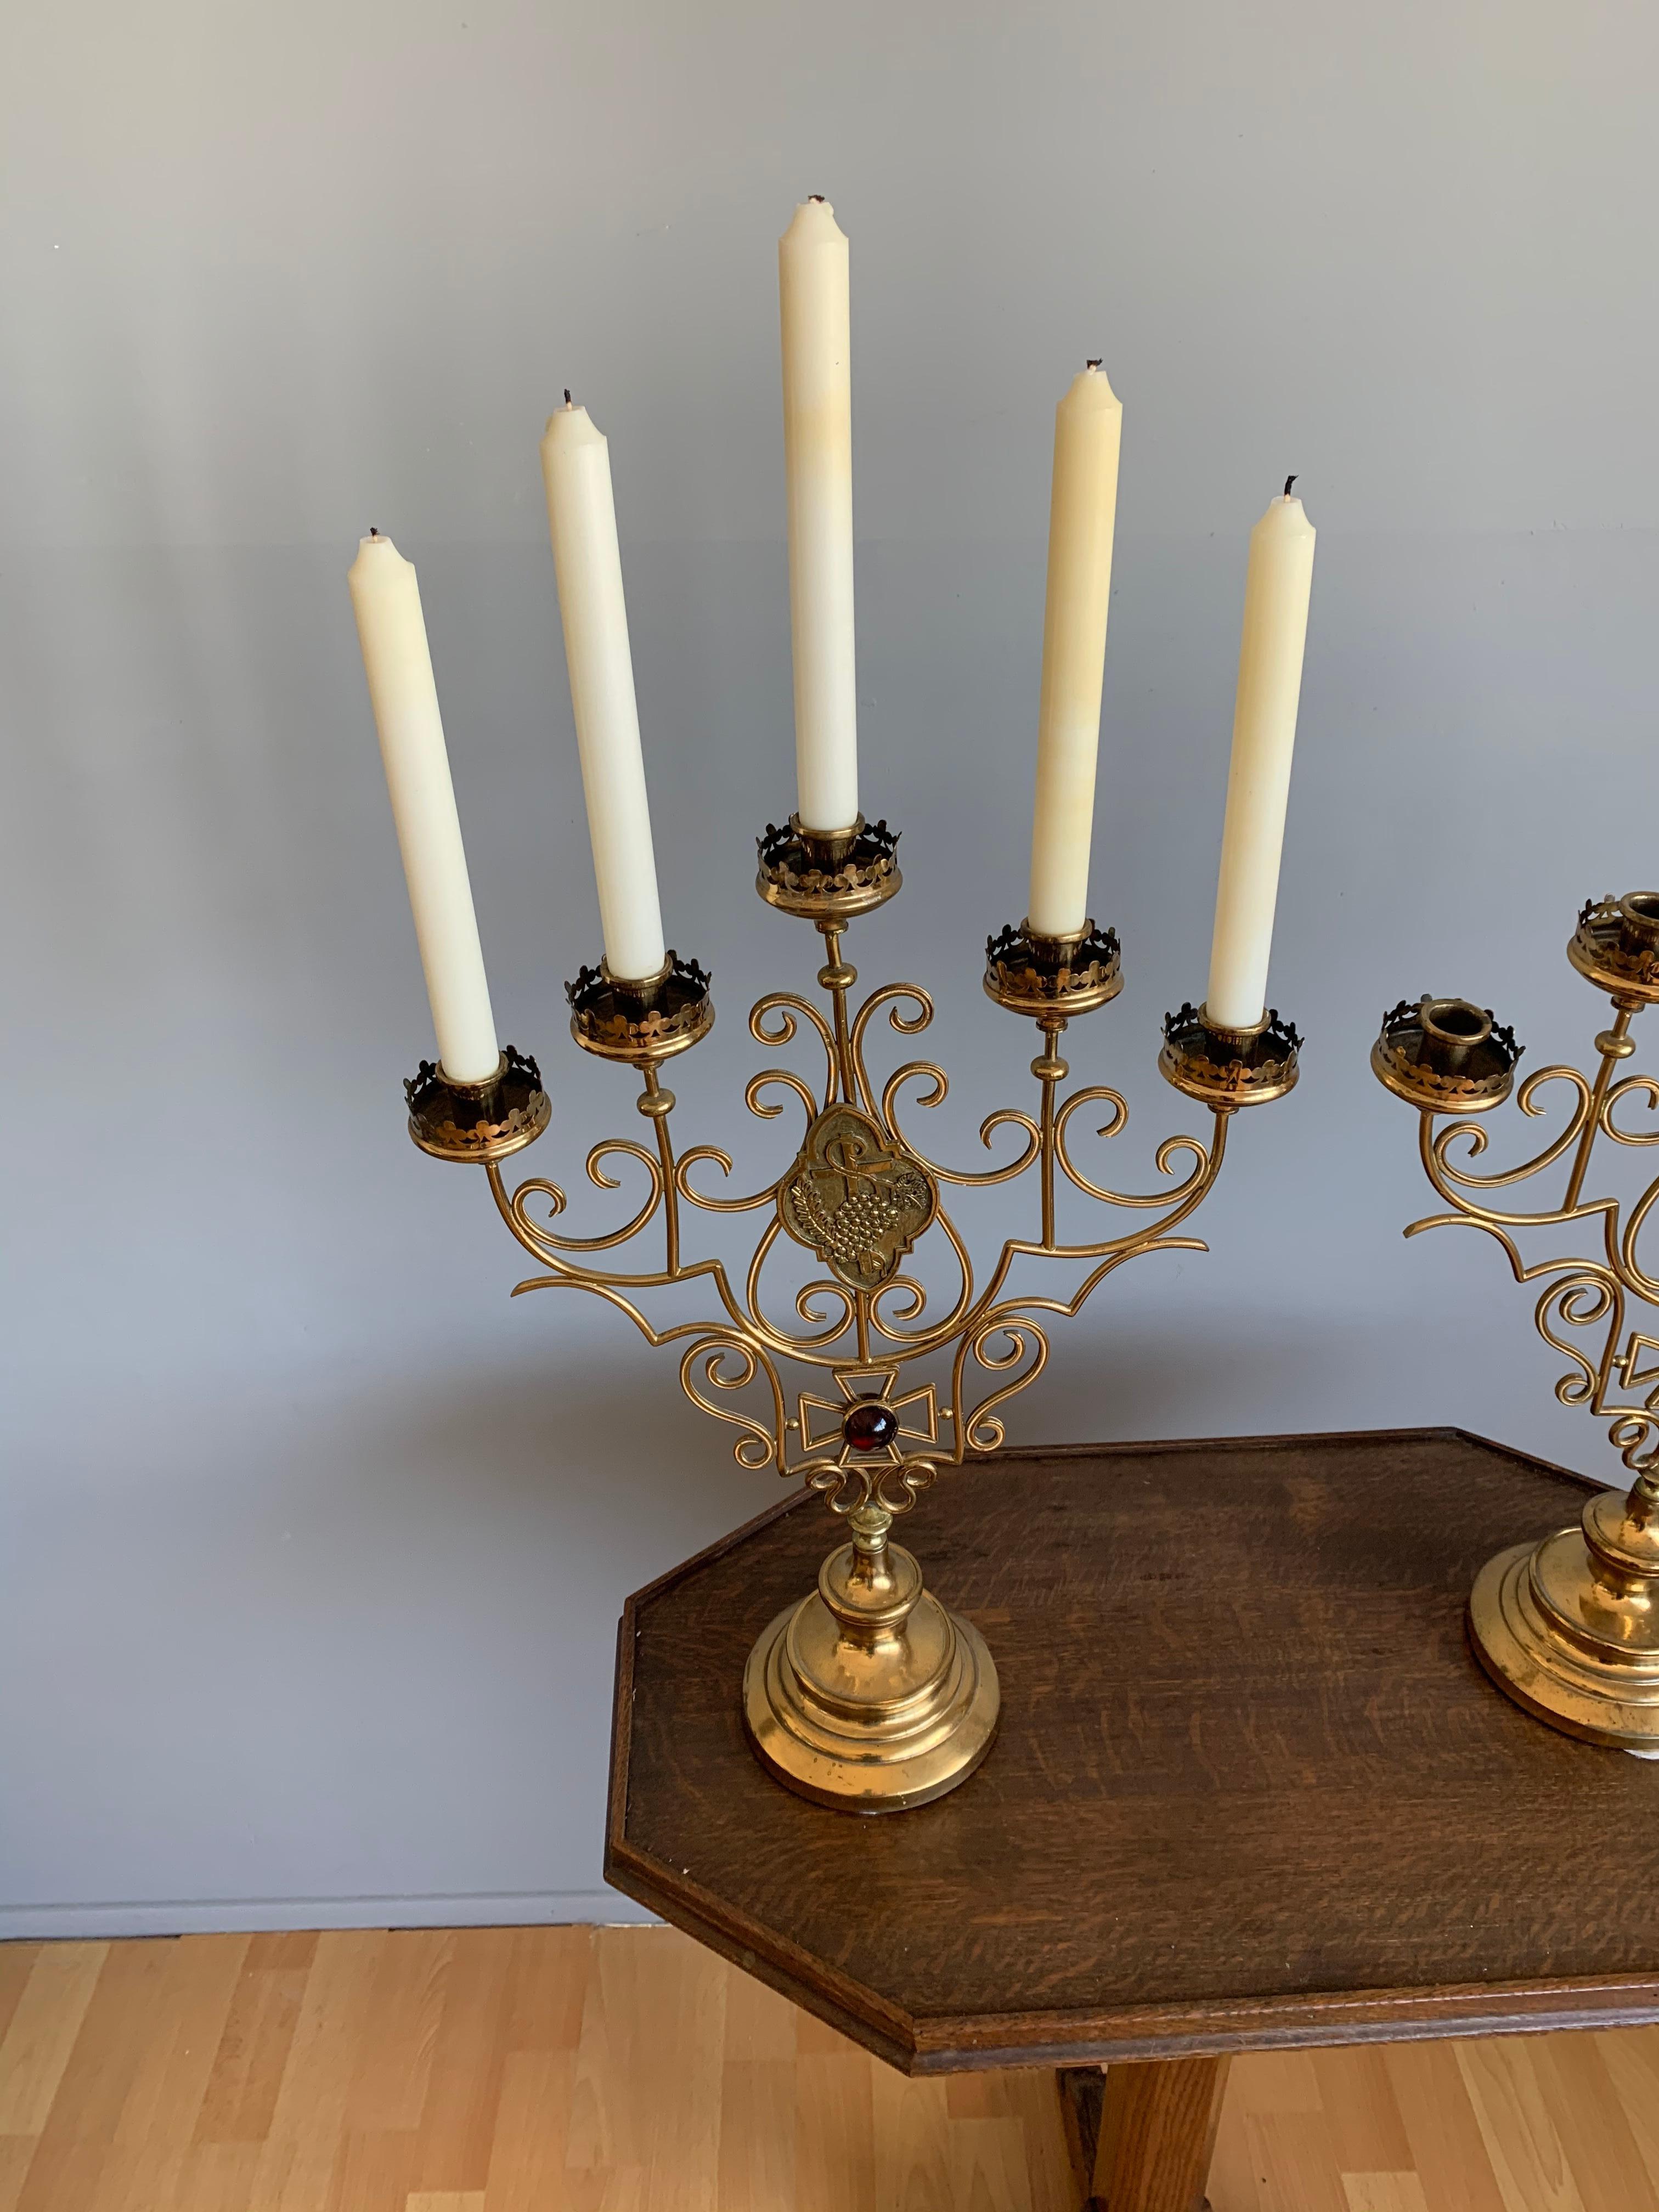 Gilt Scrolling Design and Excellent Condition, Large Pair of Gothic Art Candelabras For Sale